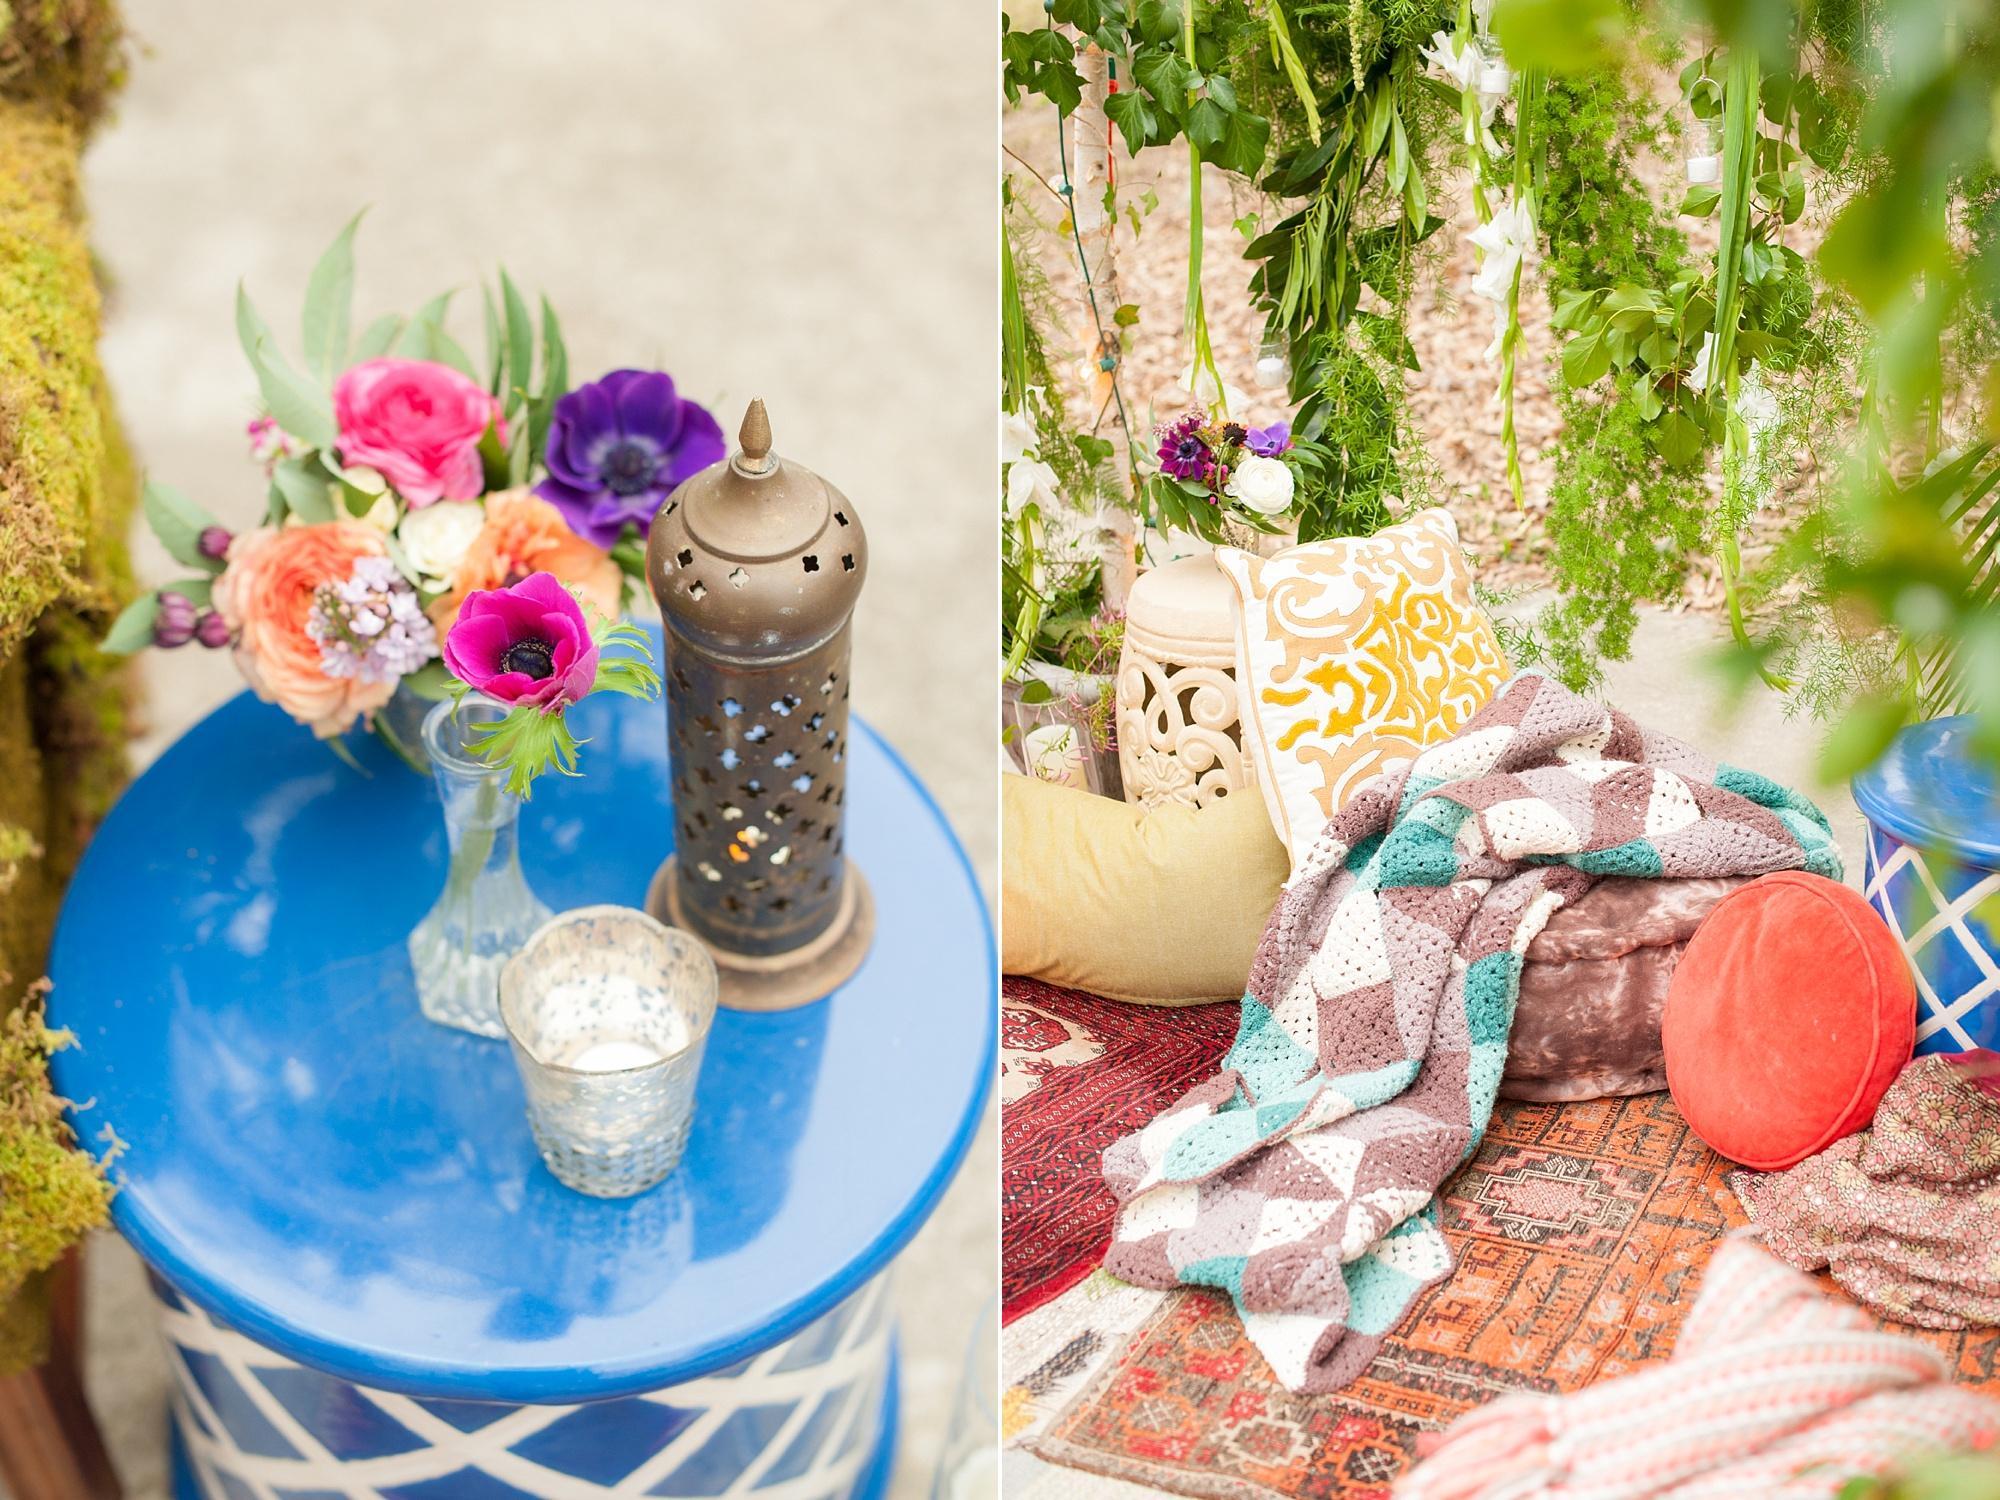 Enchanted garden birthday photos with floral nook. Images by Mikkel Paige Photography, Raleigh wedding photographer, flowers by Meristem Floral.